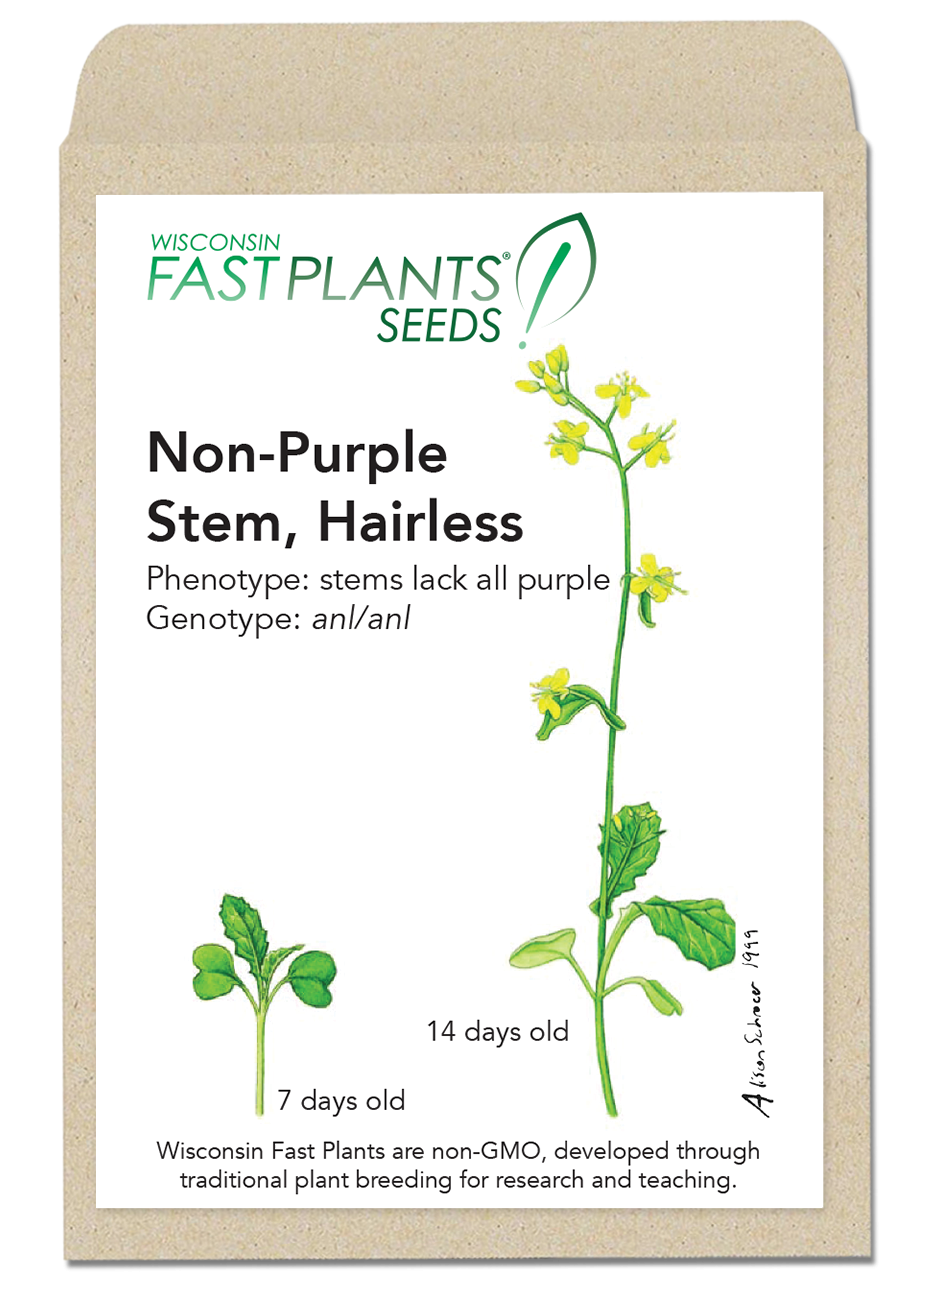 Non-Purple Stem, Hairless Fast Plants seed packet